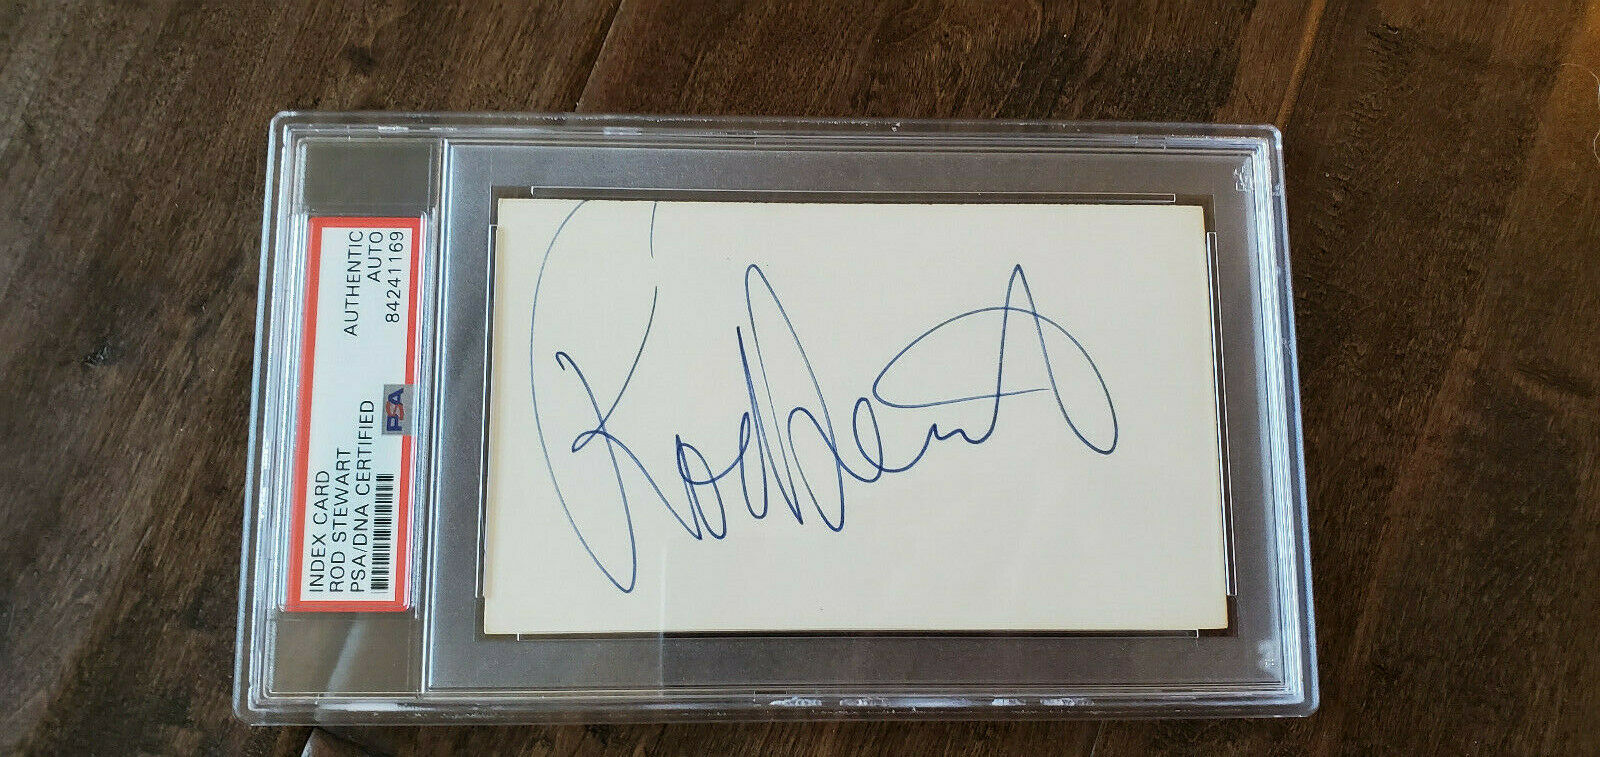 Rod Stewart Signed Auto 3x5 Index Card Faces Rock & Roll Hall Of Fame Psa Dna